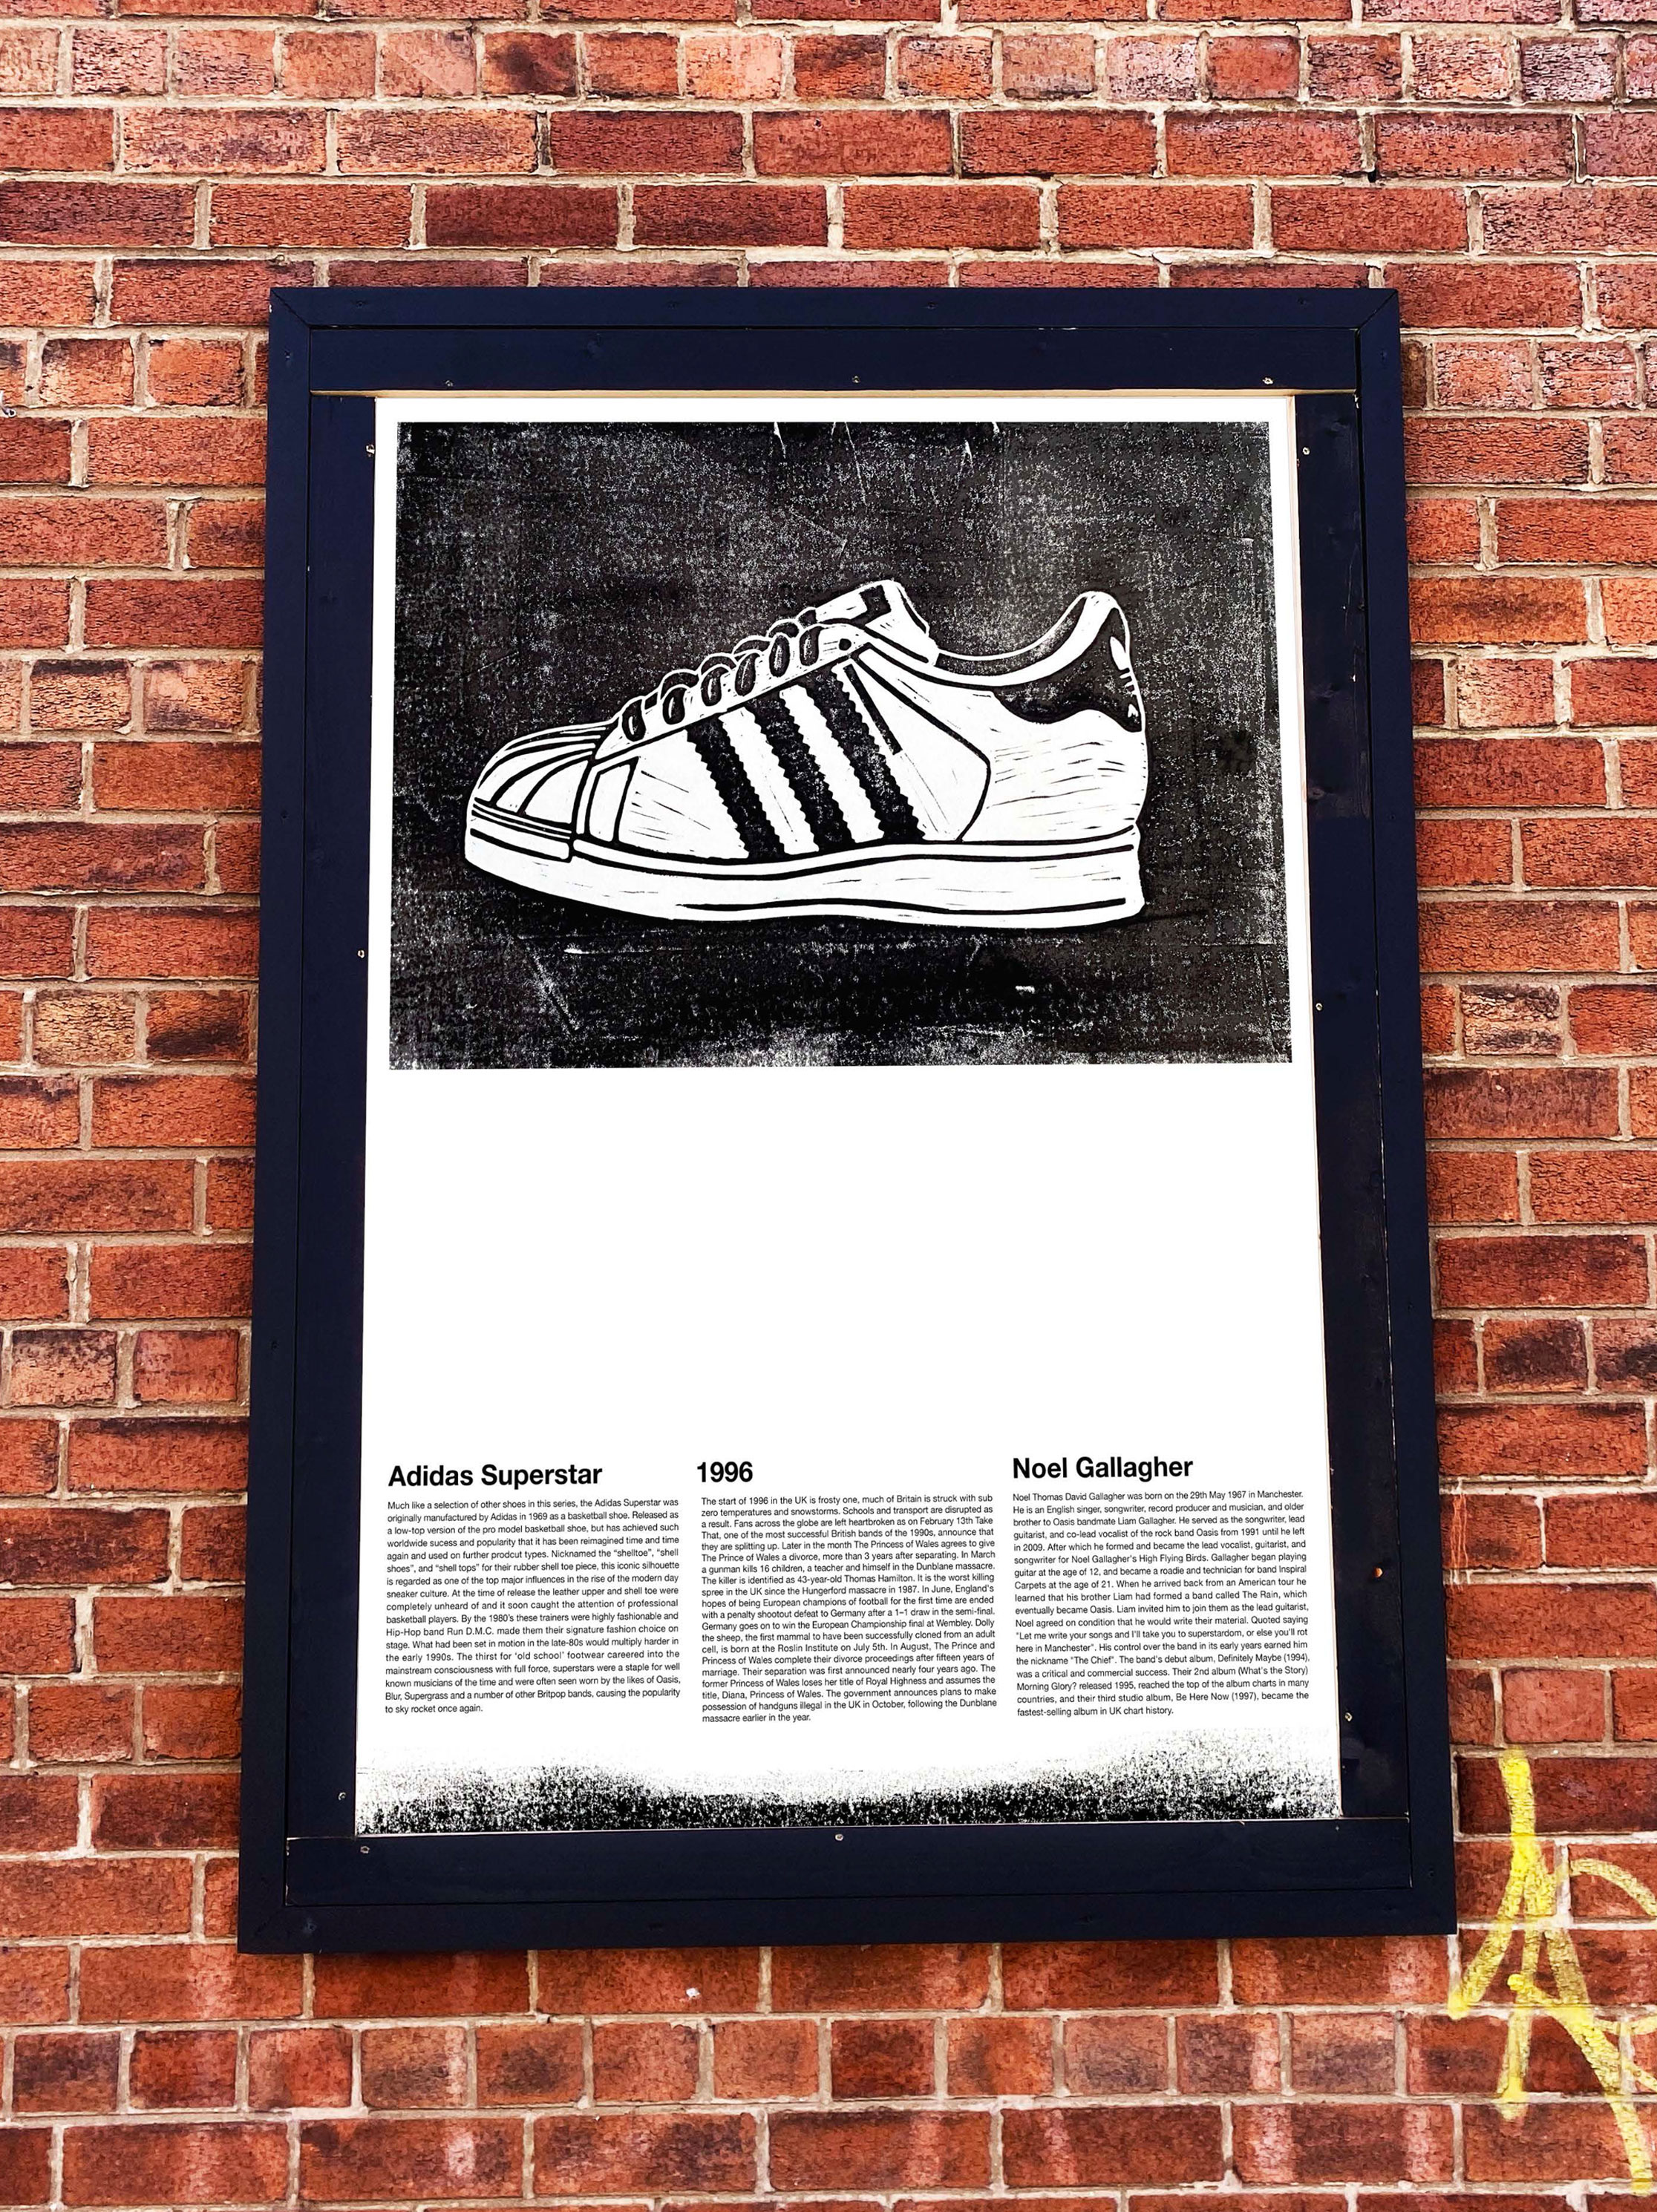 Mock-up photograph, poster in situe, featuring linocut print of Adidias Superstars trainers